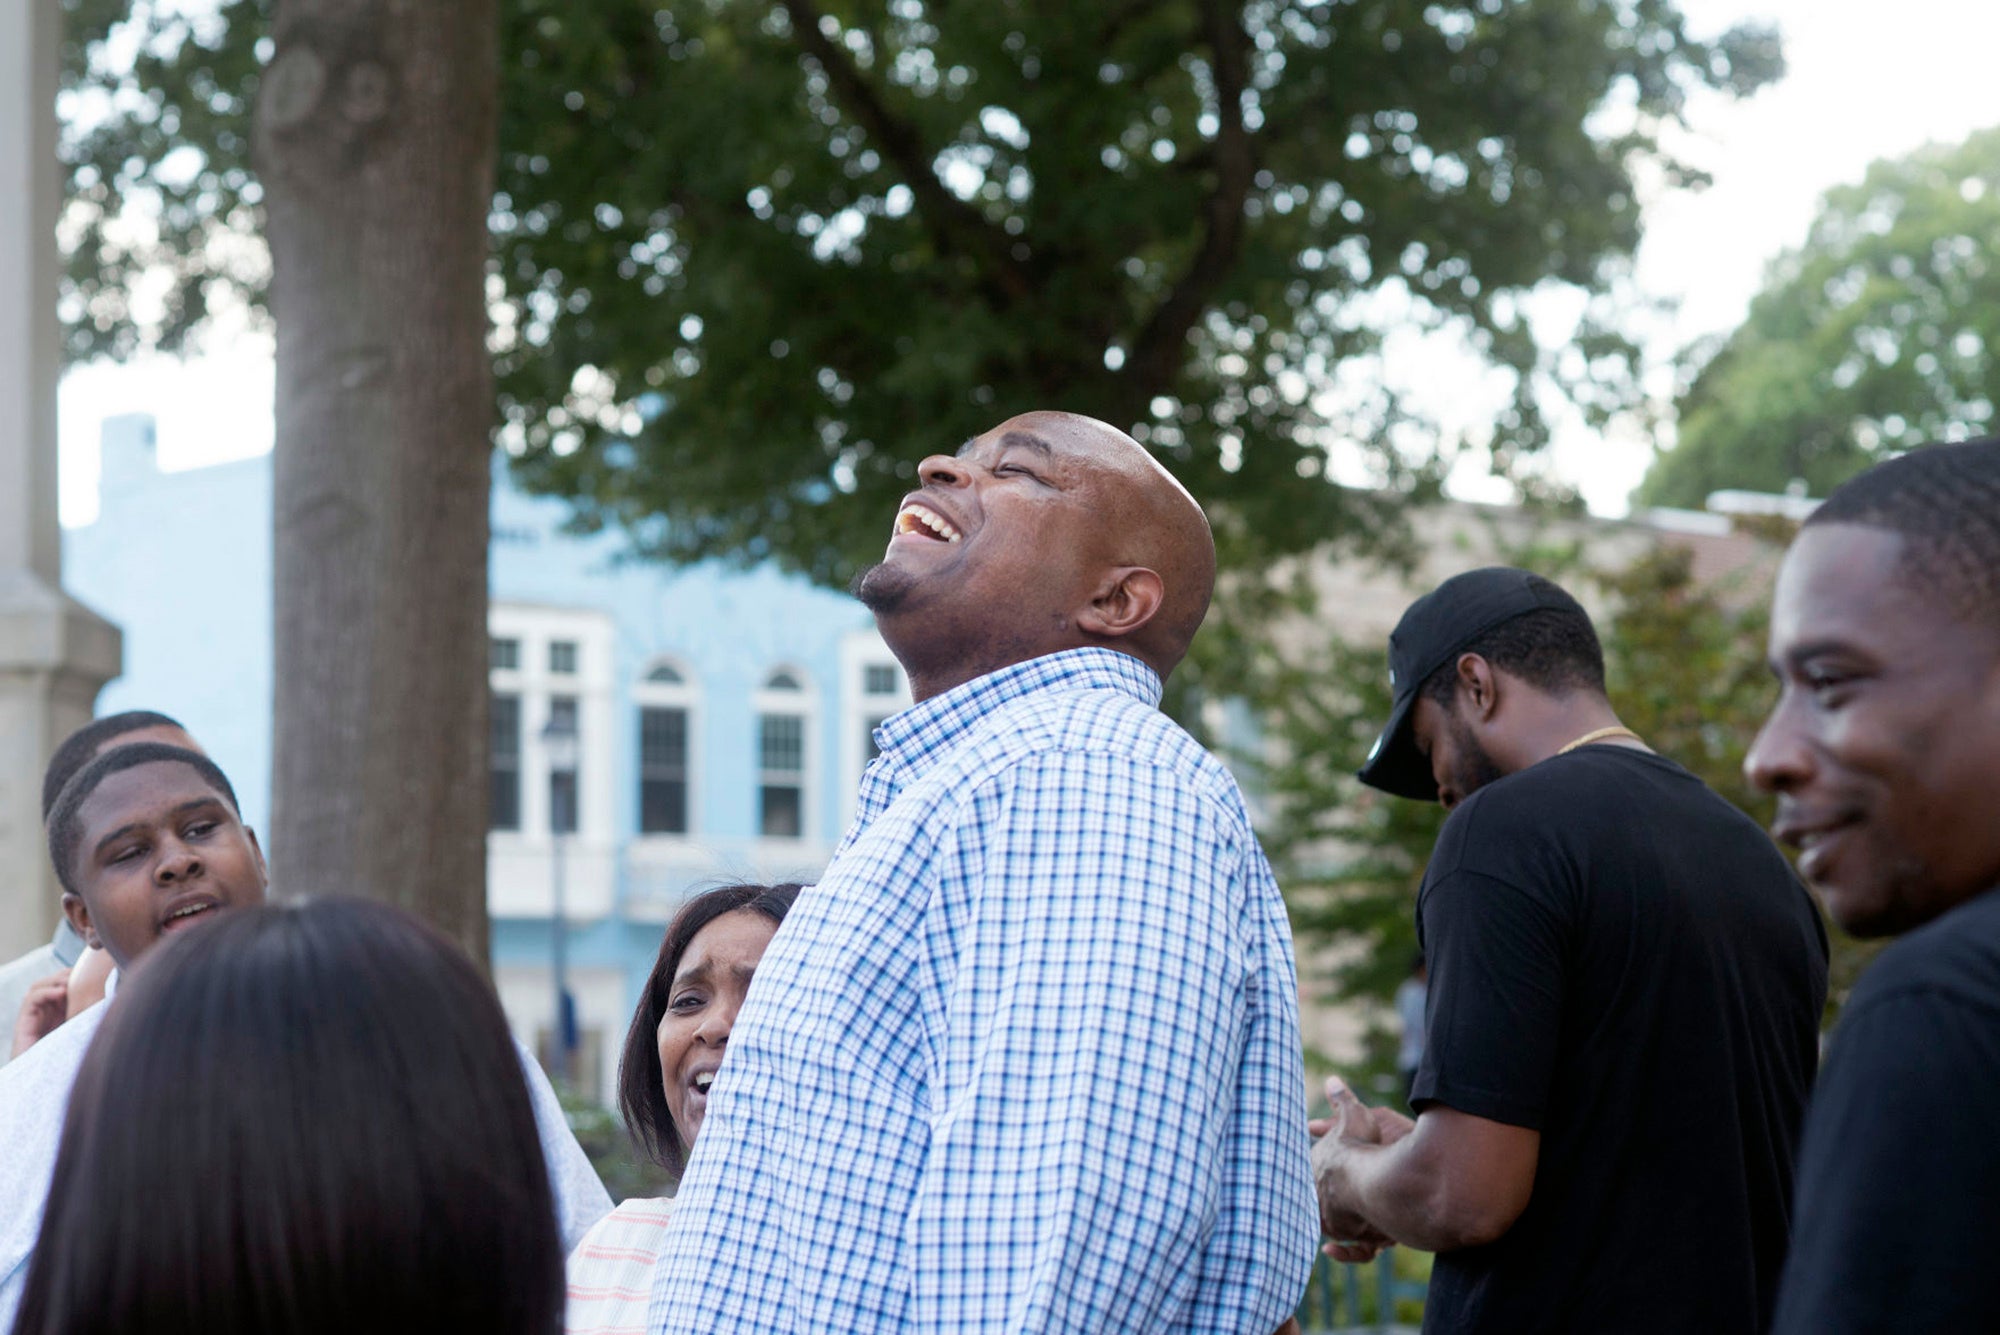 Dontae Sharpe breathing the air outside the Pitt County Courthouse in November 2019 after he finally walked free after spending 24 years behind bars for a crime he didn’t commit